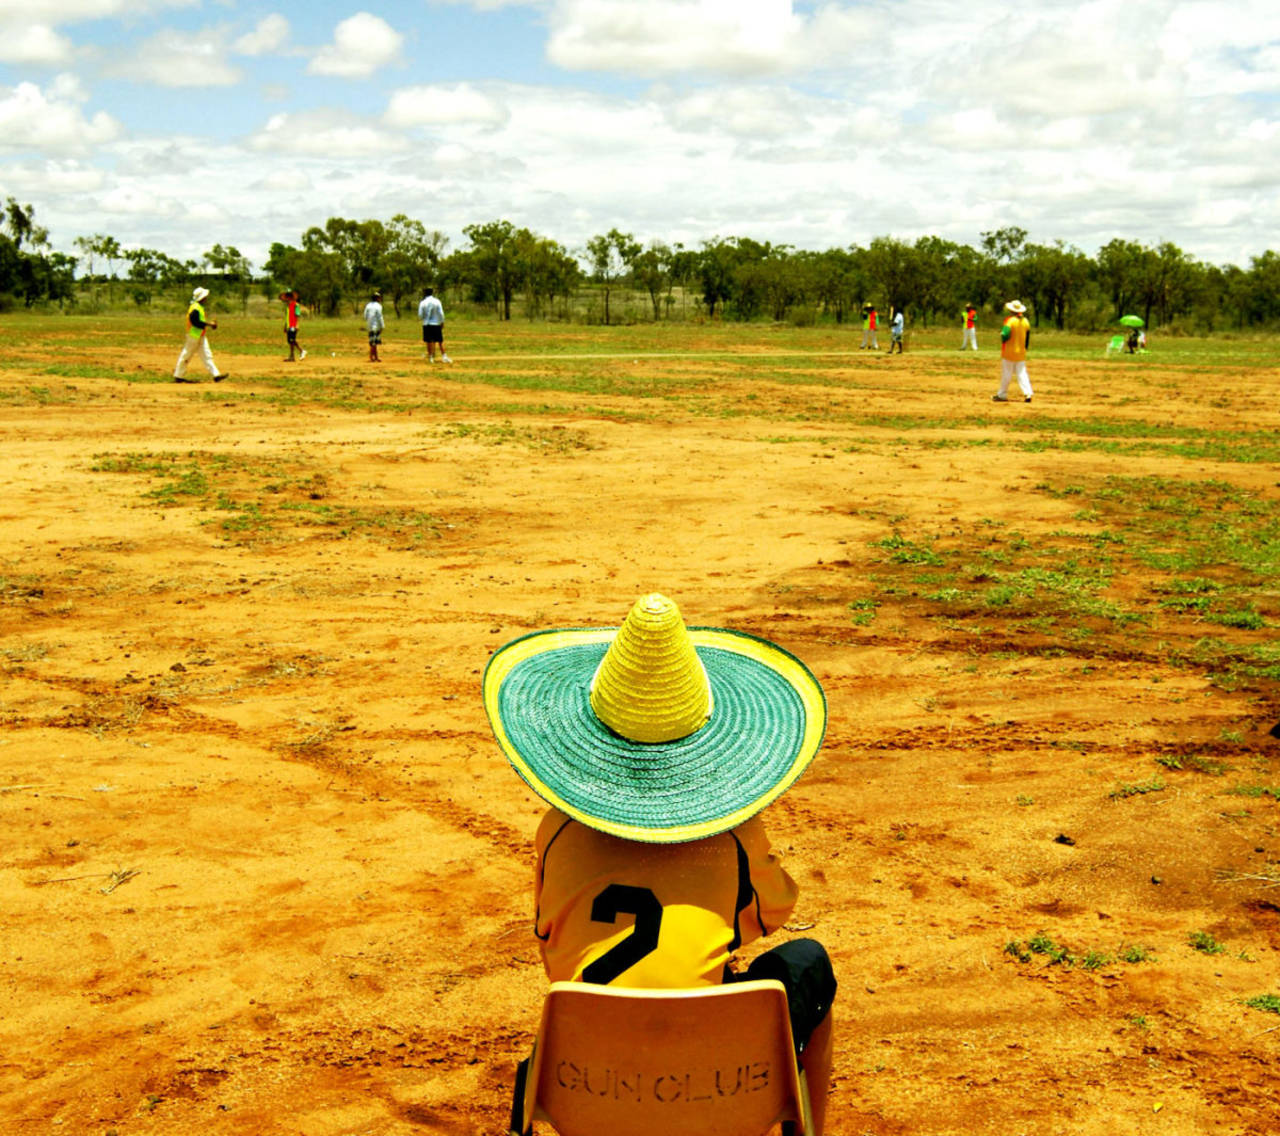 A spectator watches a social grade of cricket during the Goldfield Ashes in Charters Towers, January 27, 2007 